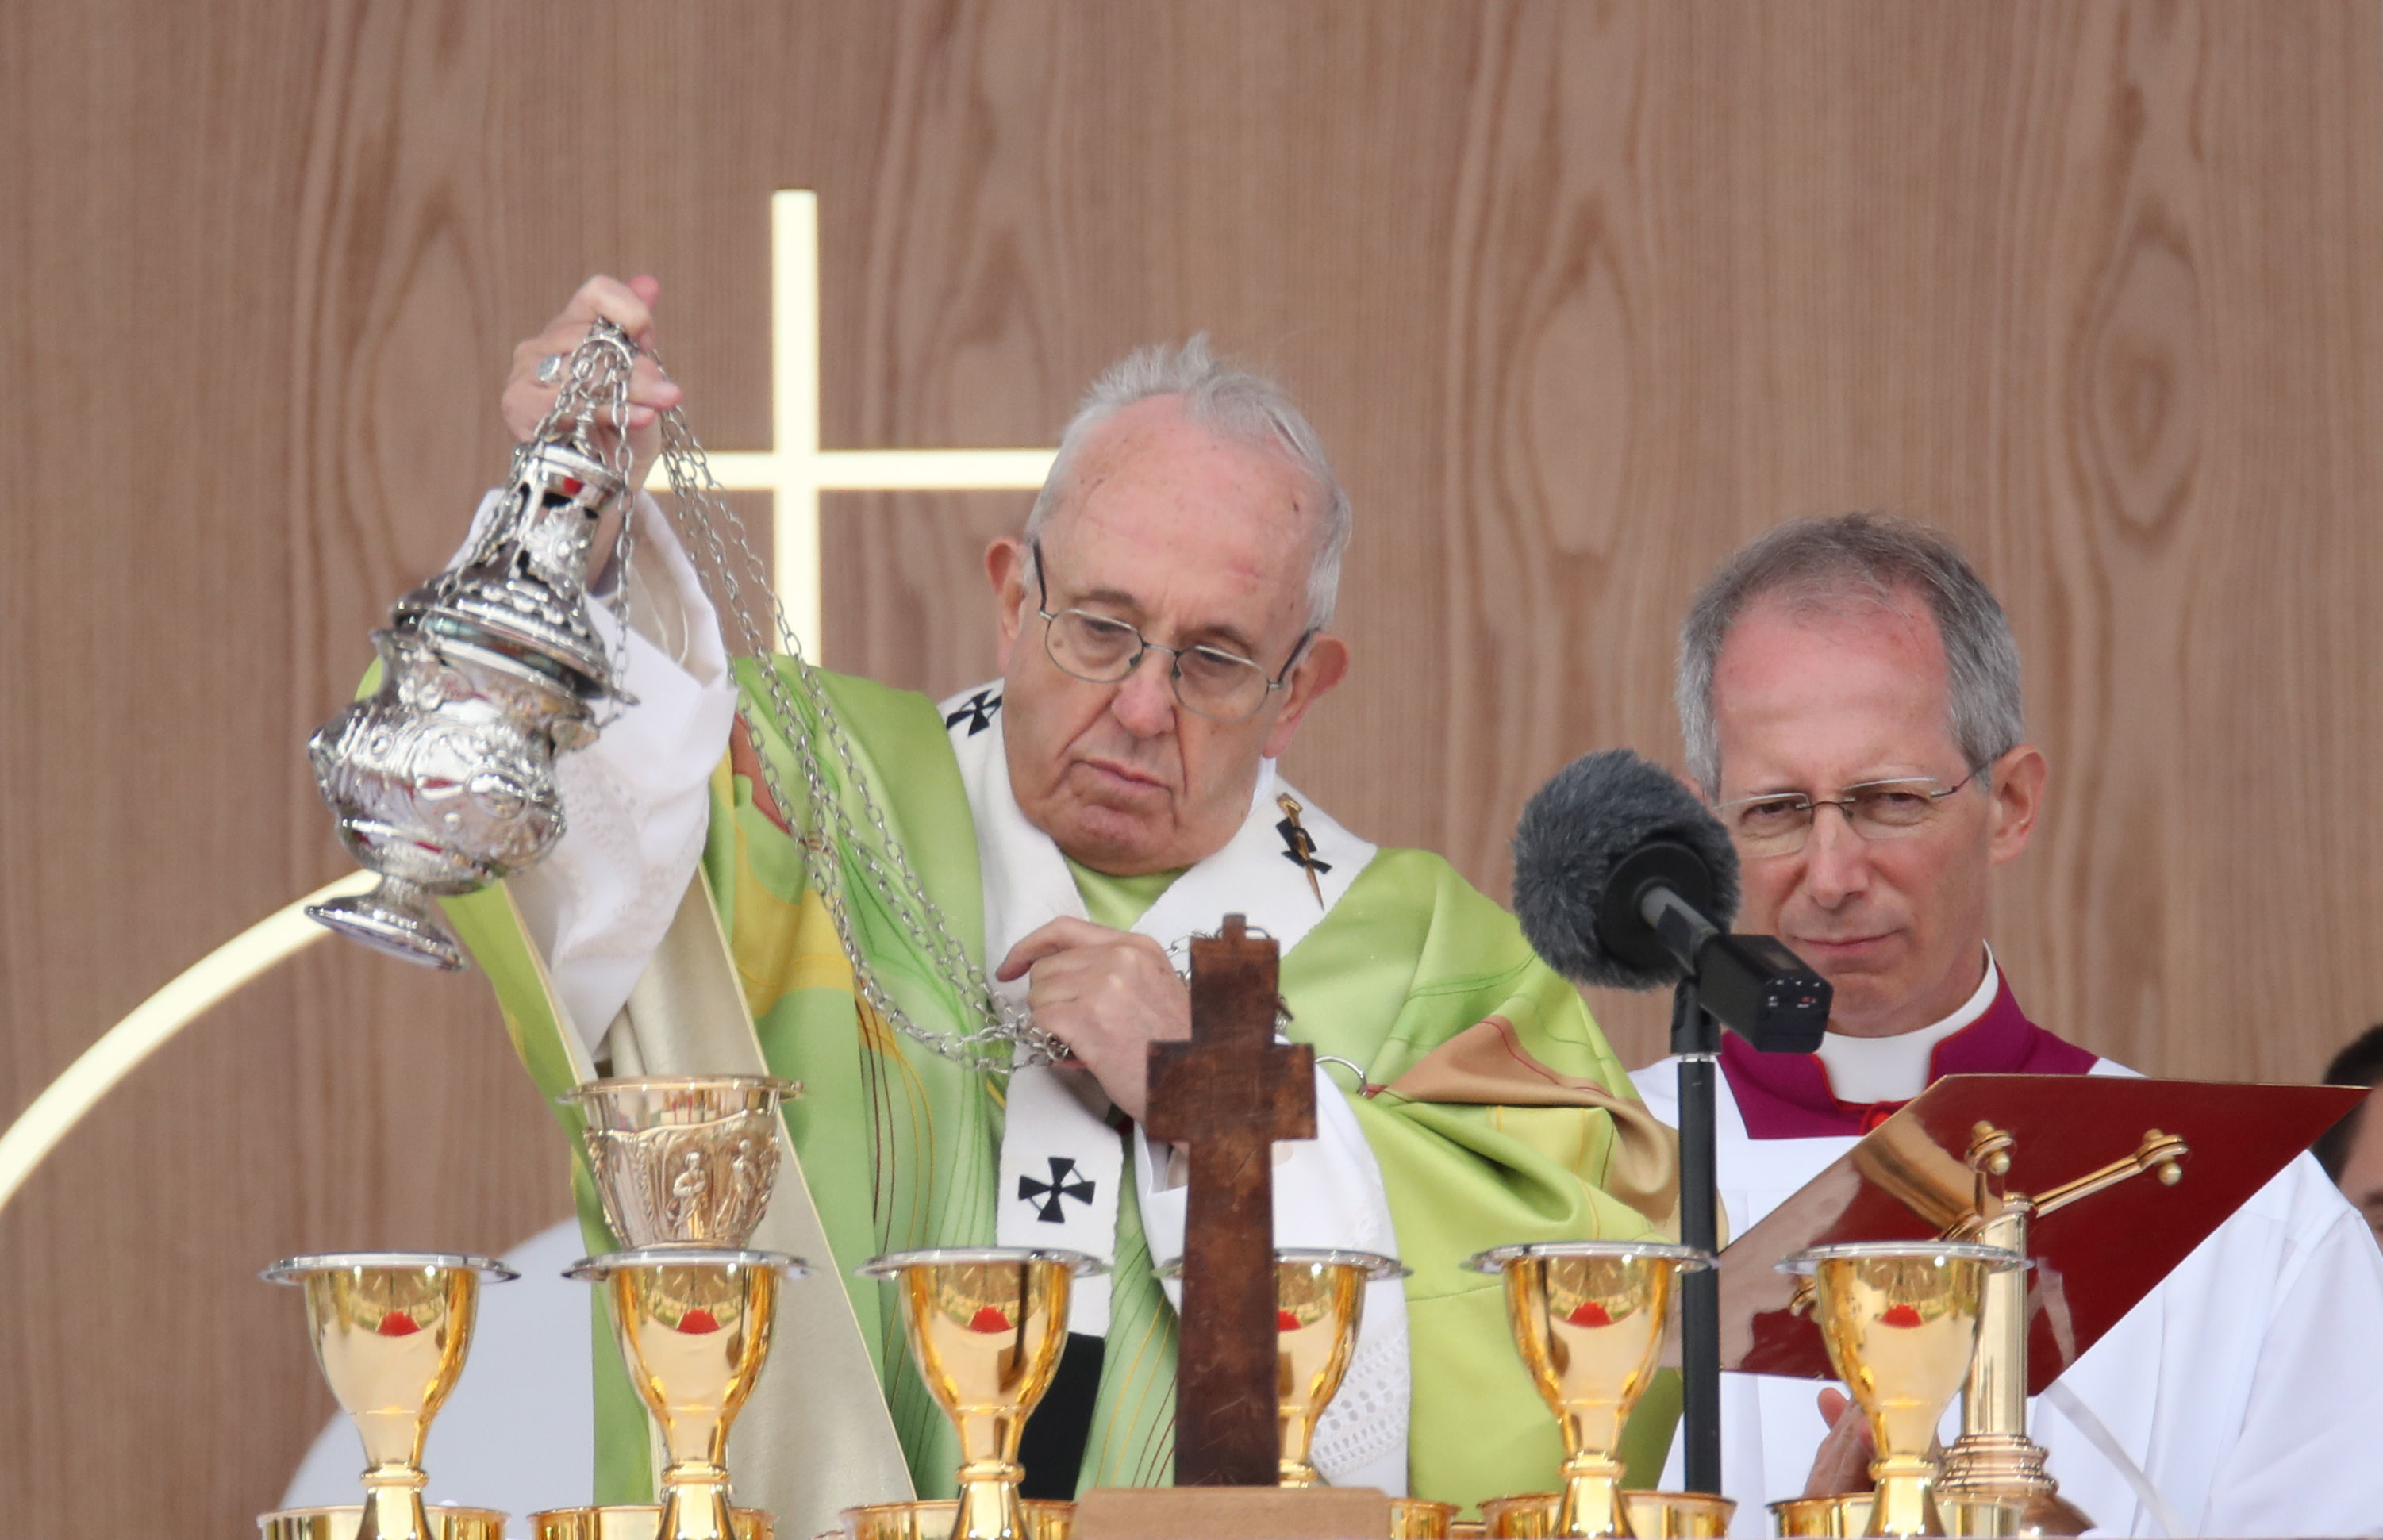 Pope offers alms amid his see of troubles